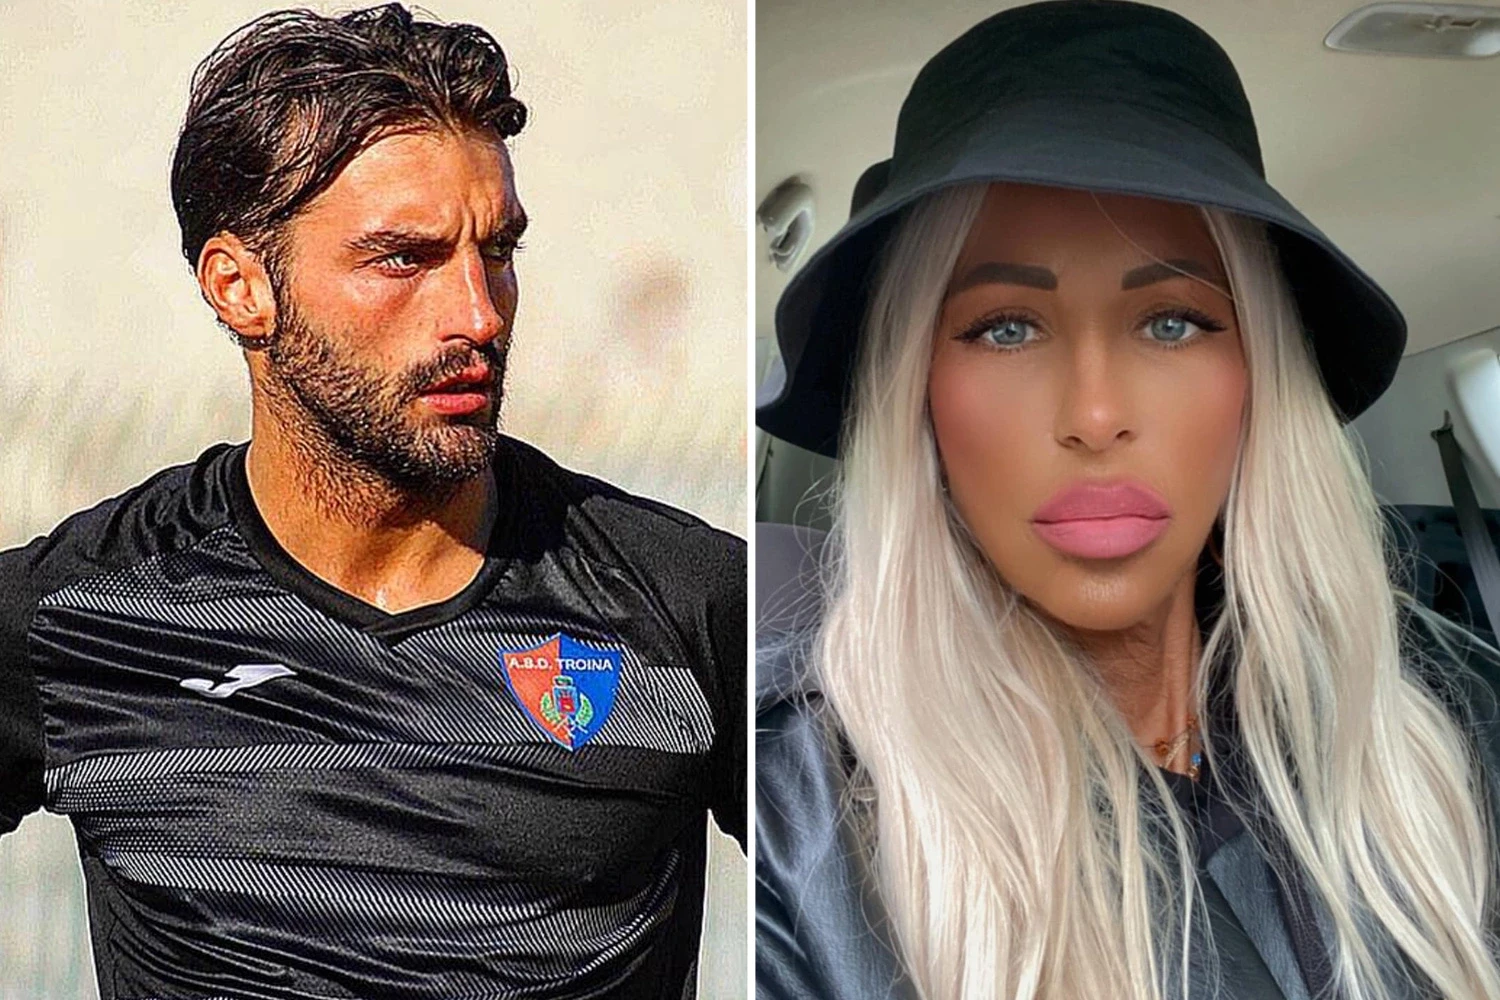 Italian footballer and model Giovanni Padovani, 28, is jailed for life for stalking and beating his ex-girlfriend,�56,�to�death with a hammer